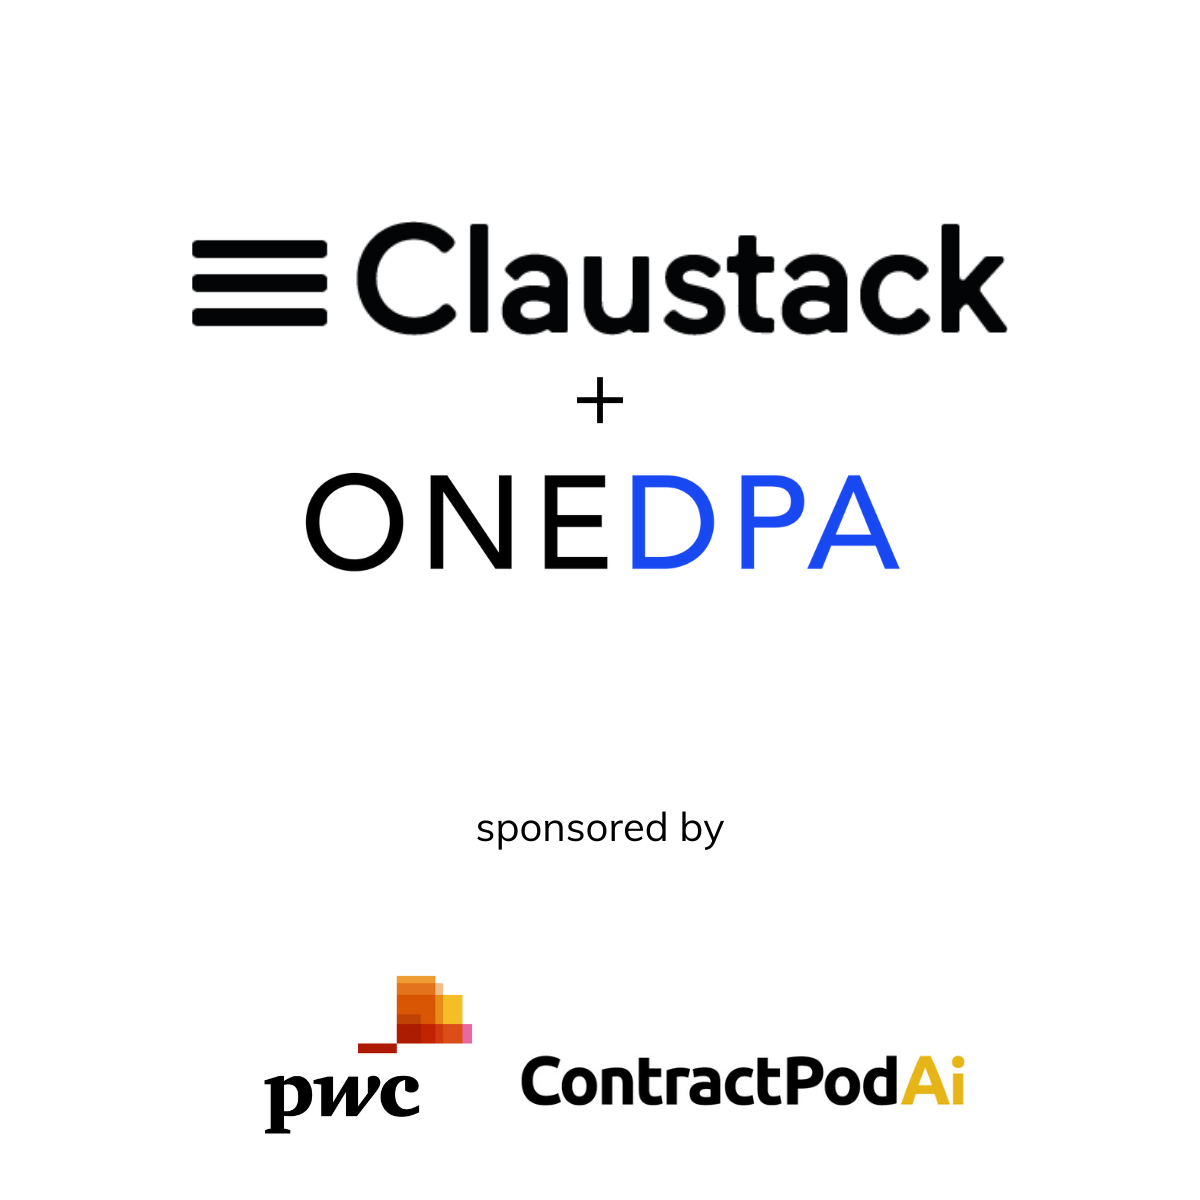 CLAUSTACK ANNOUNCES THE LAUNCH OF THE oneDPA INITIATIVE IN COLLABORATION WITH PwC NewLaw AND CONTRACTPODAi